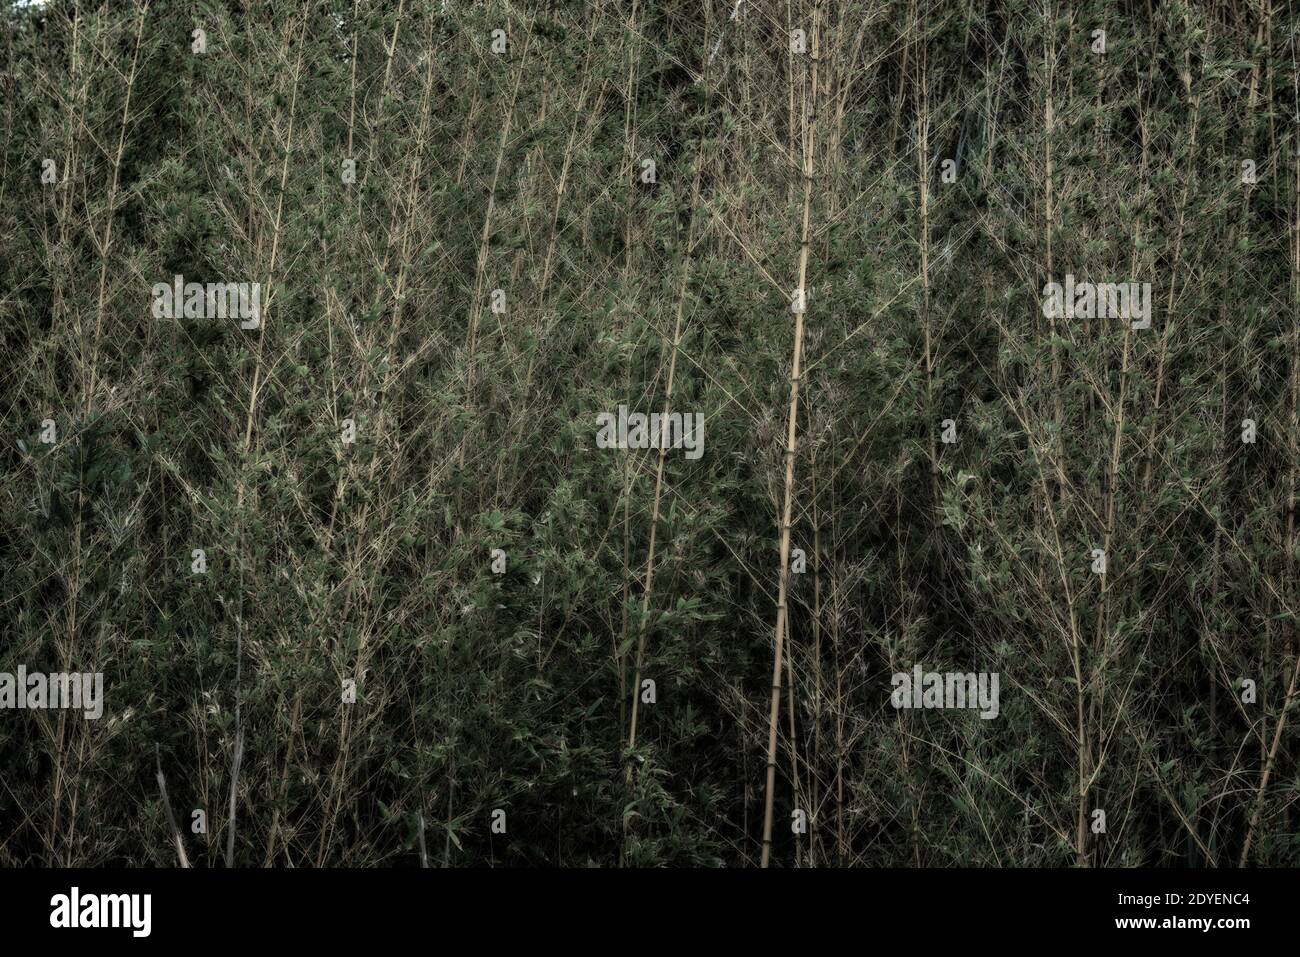 mottled yellow and dark green foliage of a bamboo forest Stock Photo